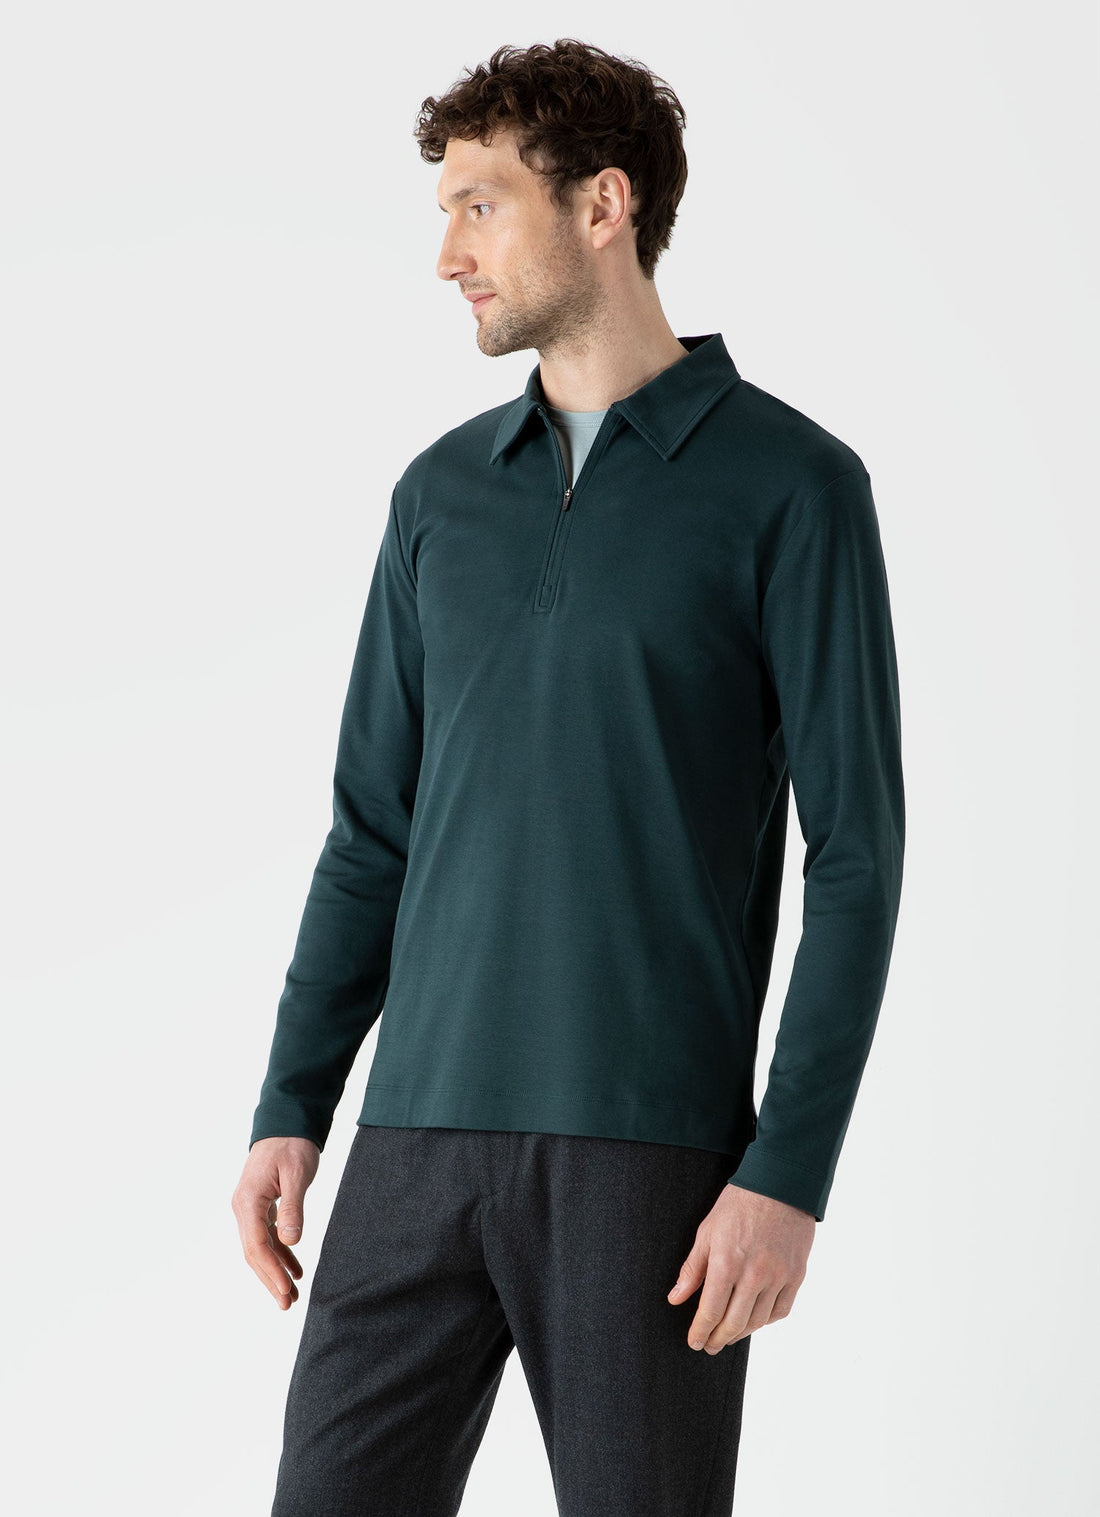 Men's Brushed Cotton Long Sleeve Polo Shirt in Peacock